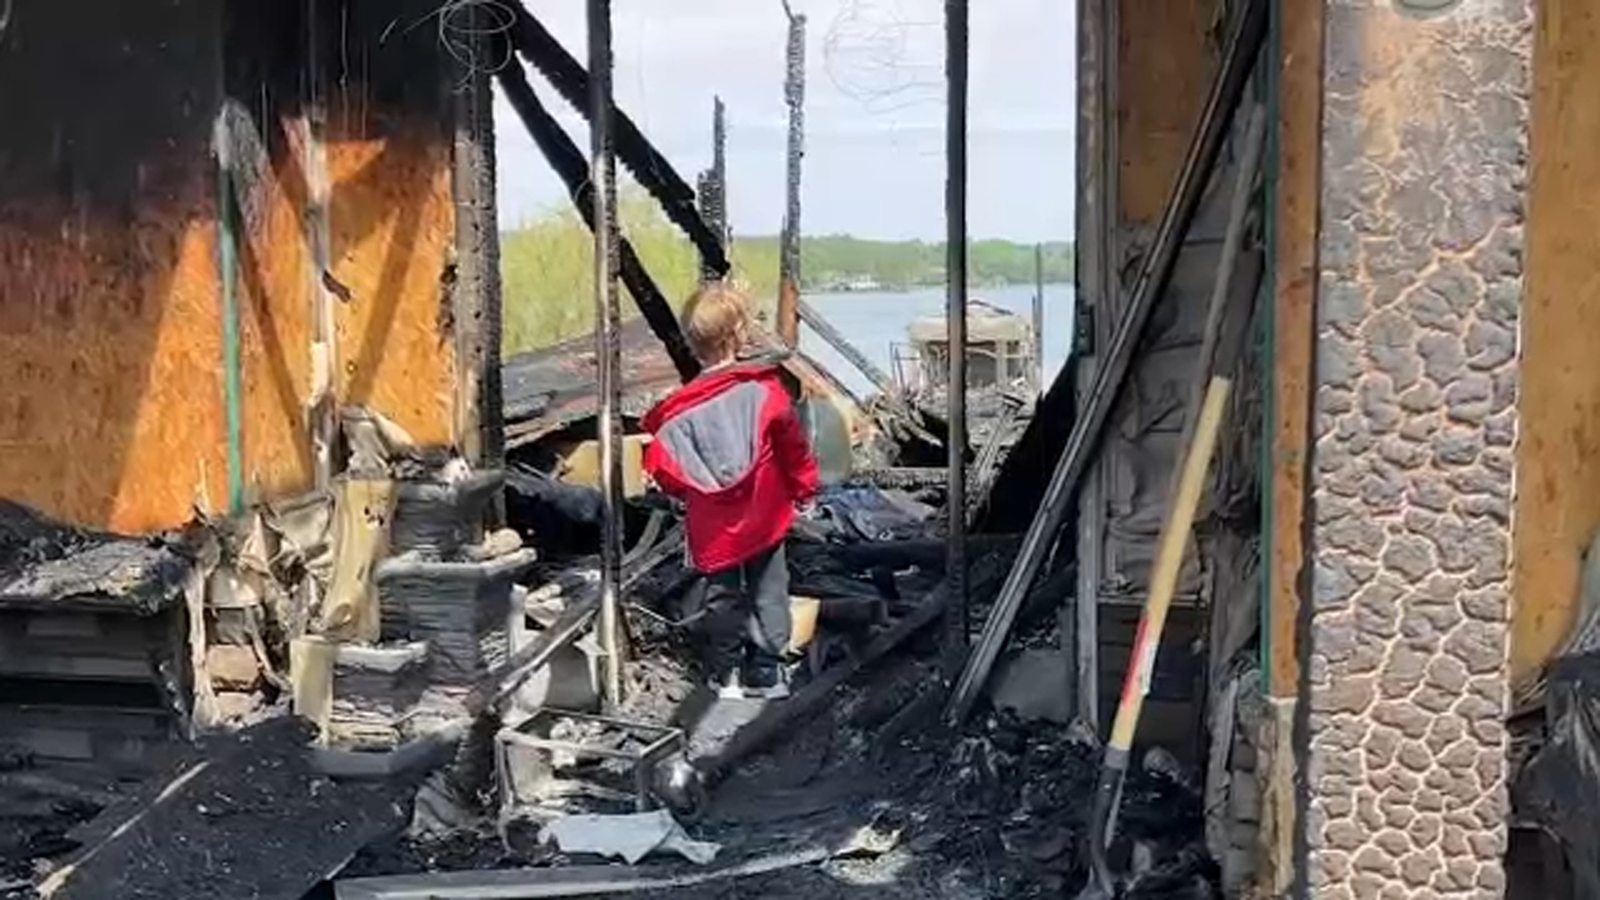 Gold Star wife who lost husband to lung cancer staying strong for sons after fire destroys home